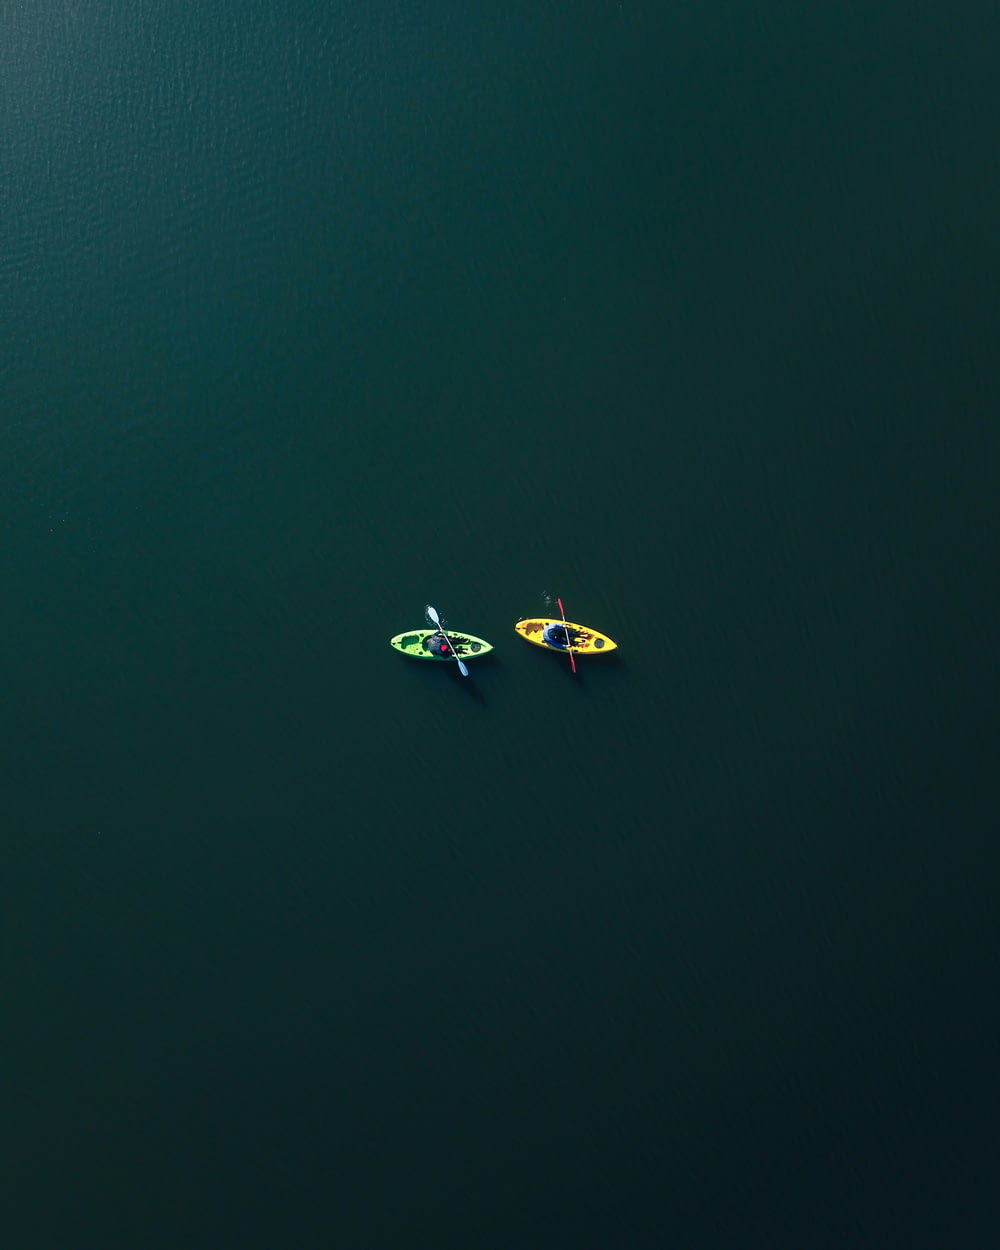 two people riding on two kayaks